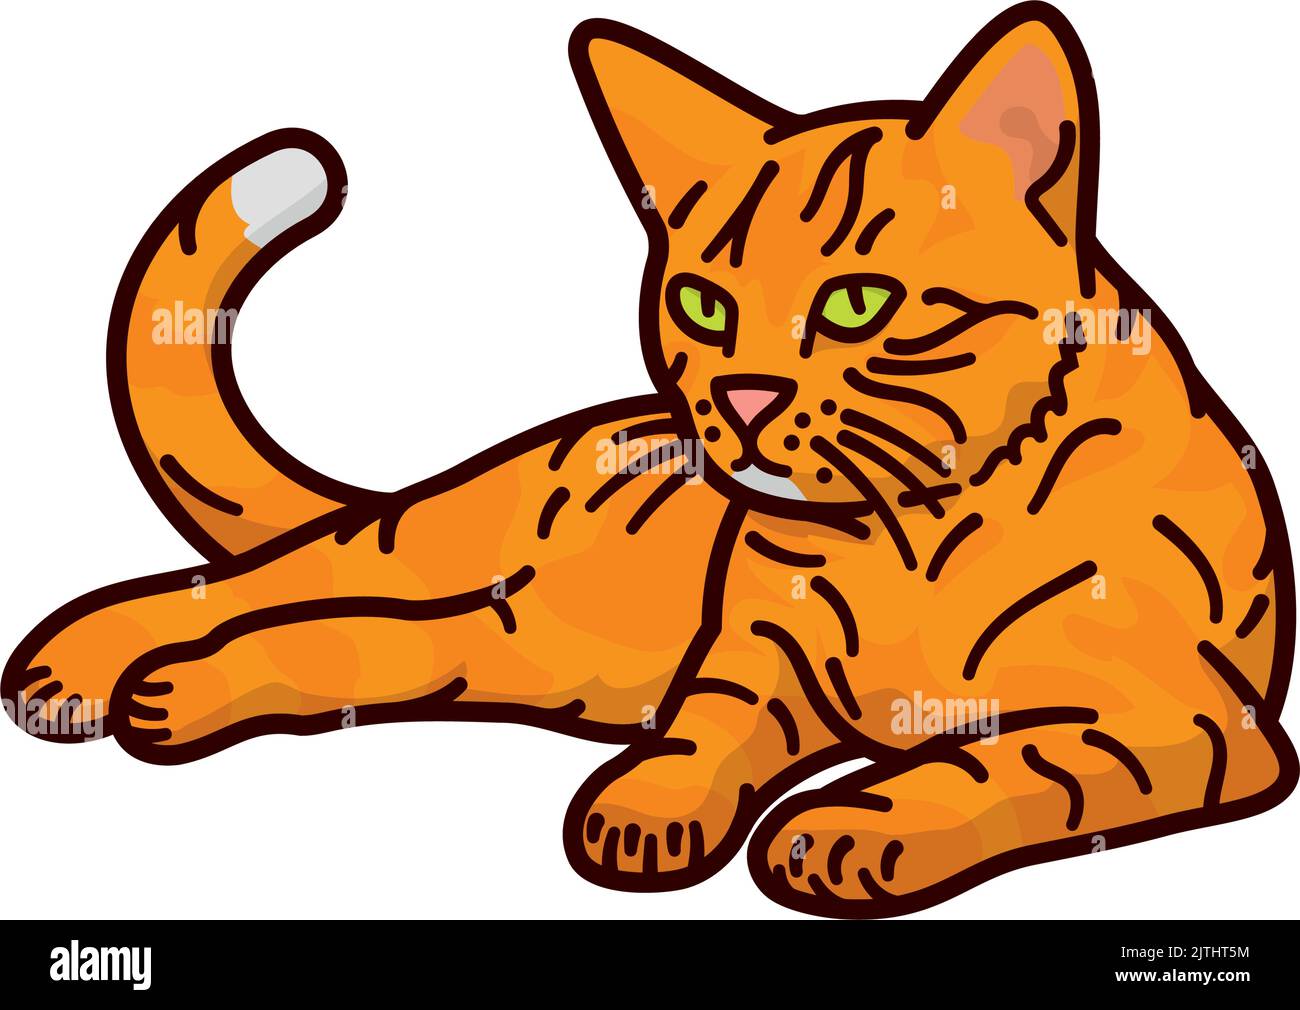 Orange colored cat isolated vector illustration for Ginger Cat Appreciation Day Day on September 1st. Filled outline cartoon style. Stock Vector